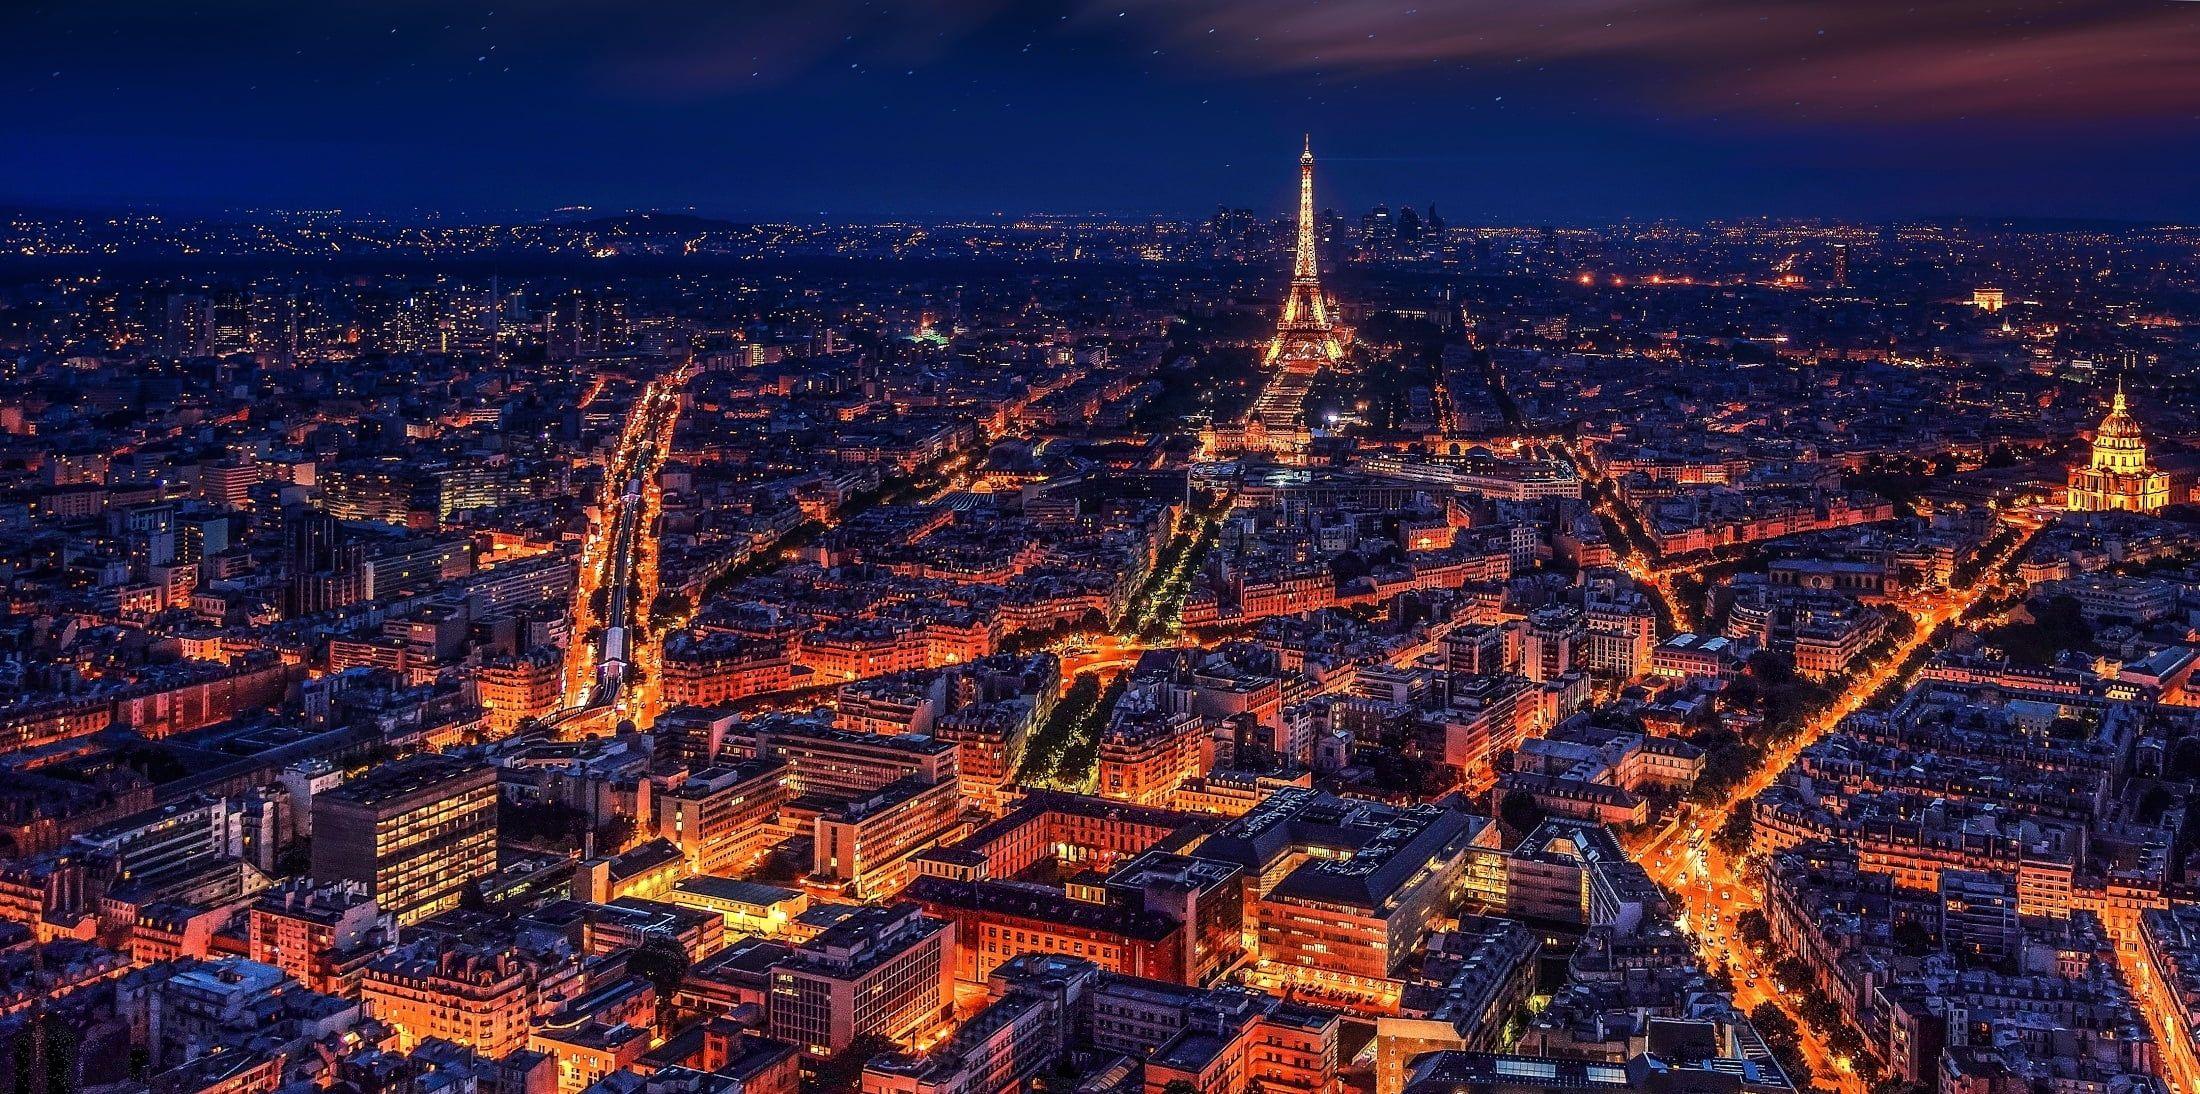 Landscape photo of Paris city seeing Eiffel Tower with buildings